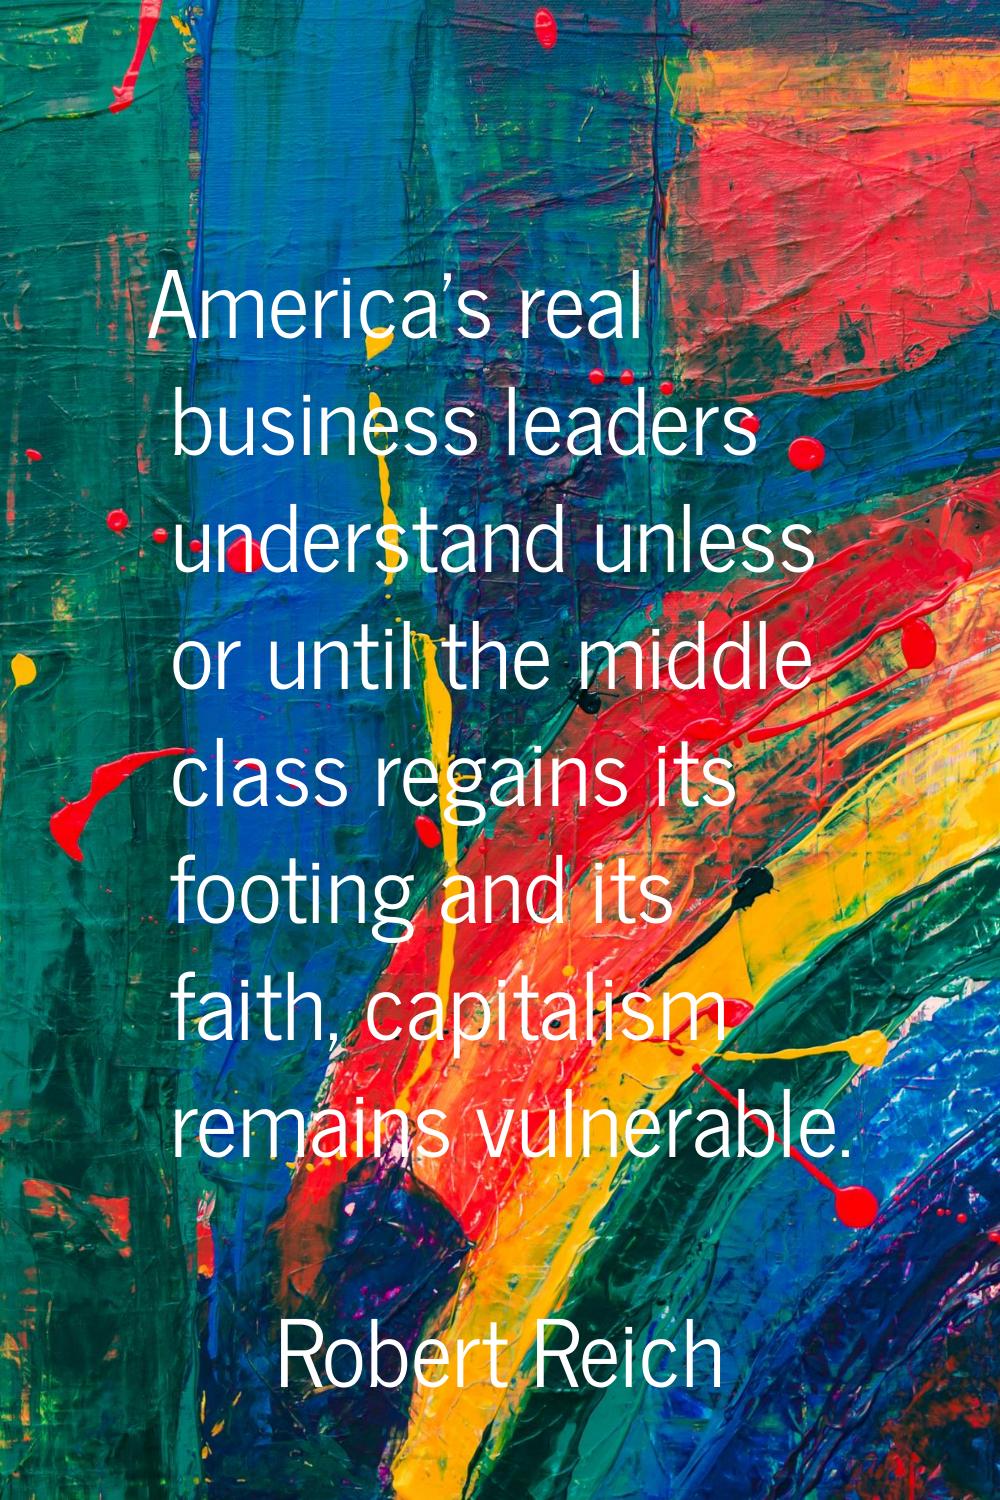 America's real business leaders understand unless or until the middle class regains its footing and